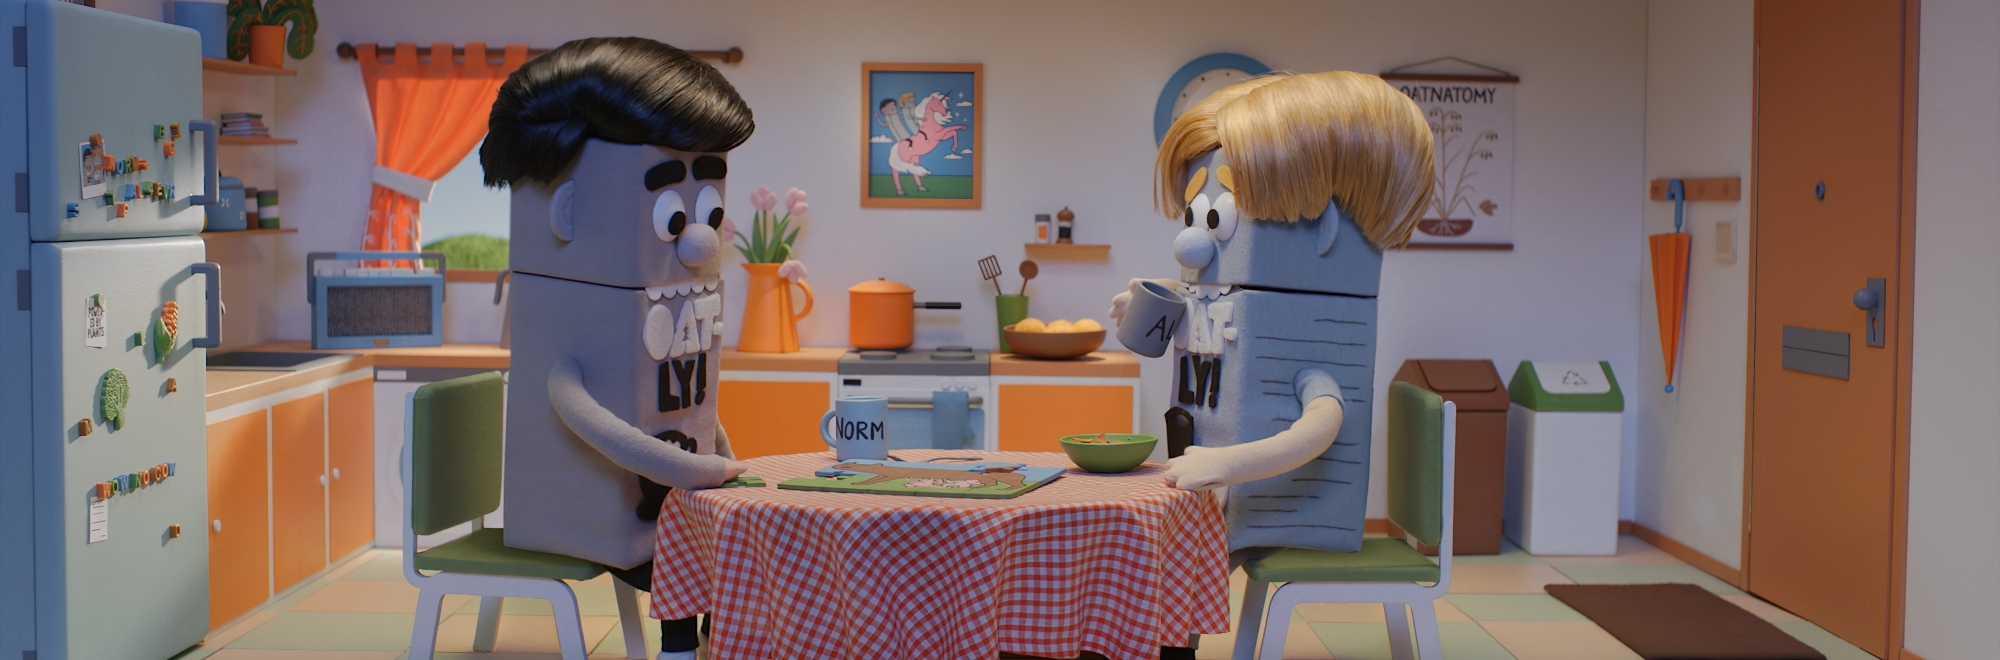 The New Norm&Al Show: Oatly creates puppets to help society switch to plant-based eating